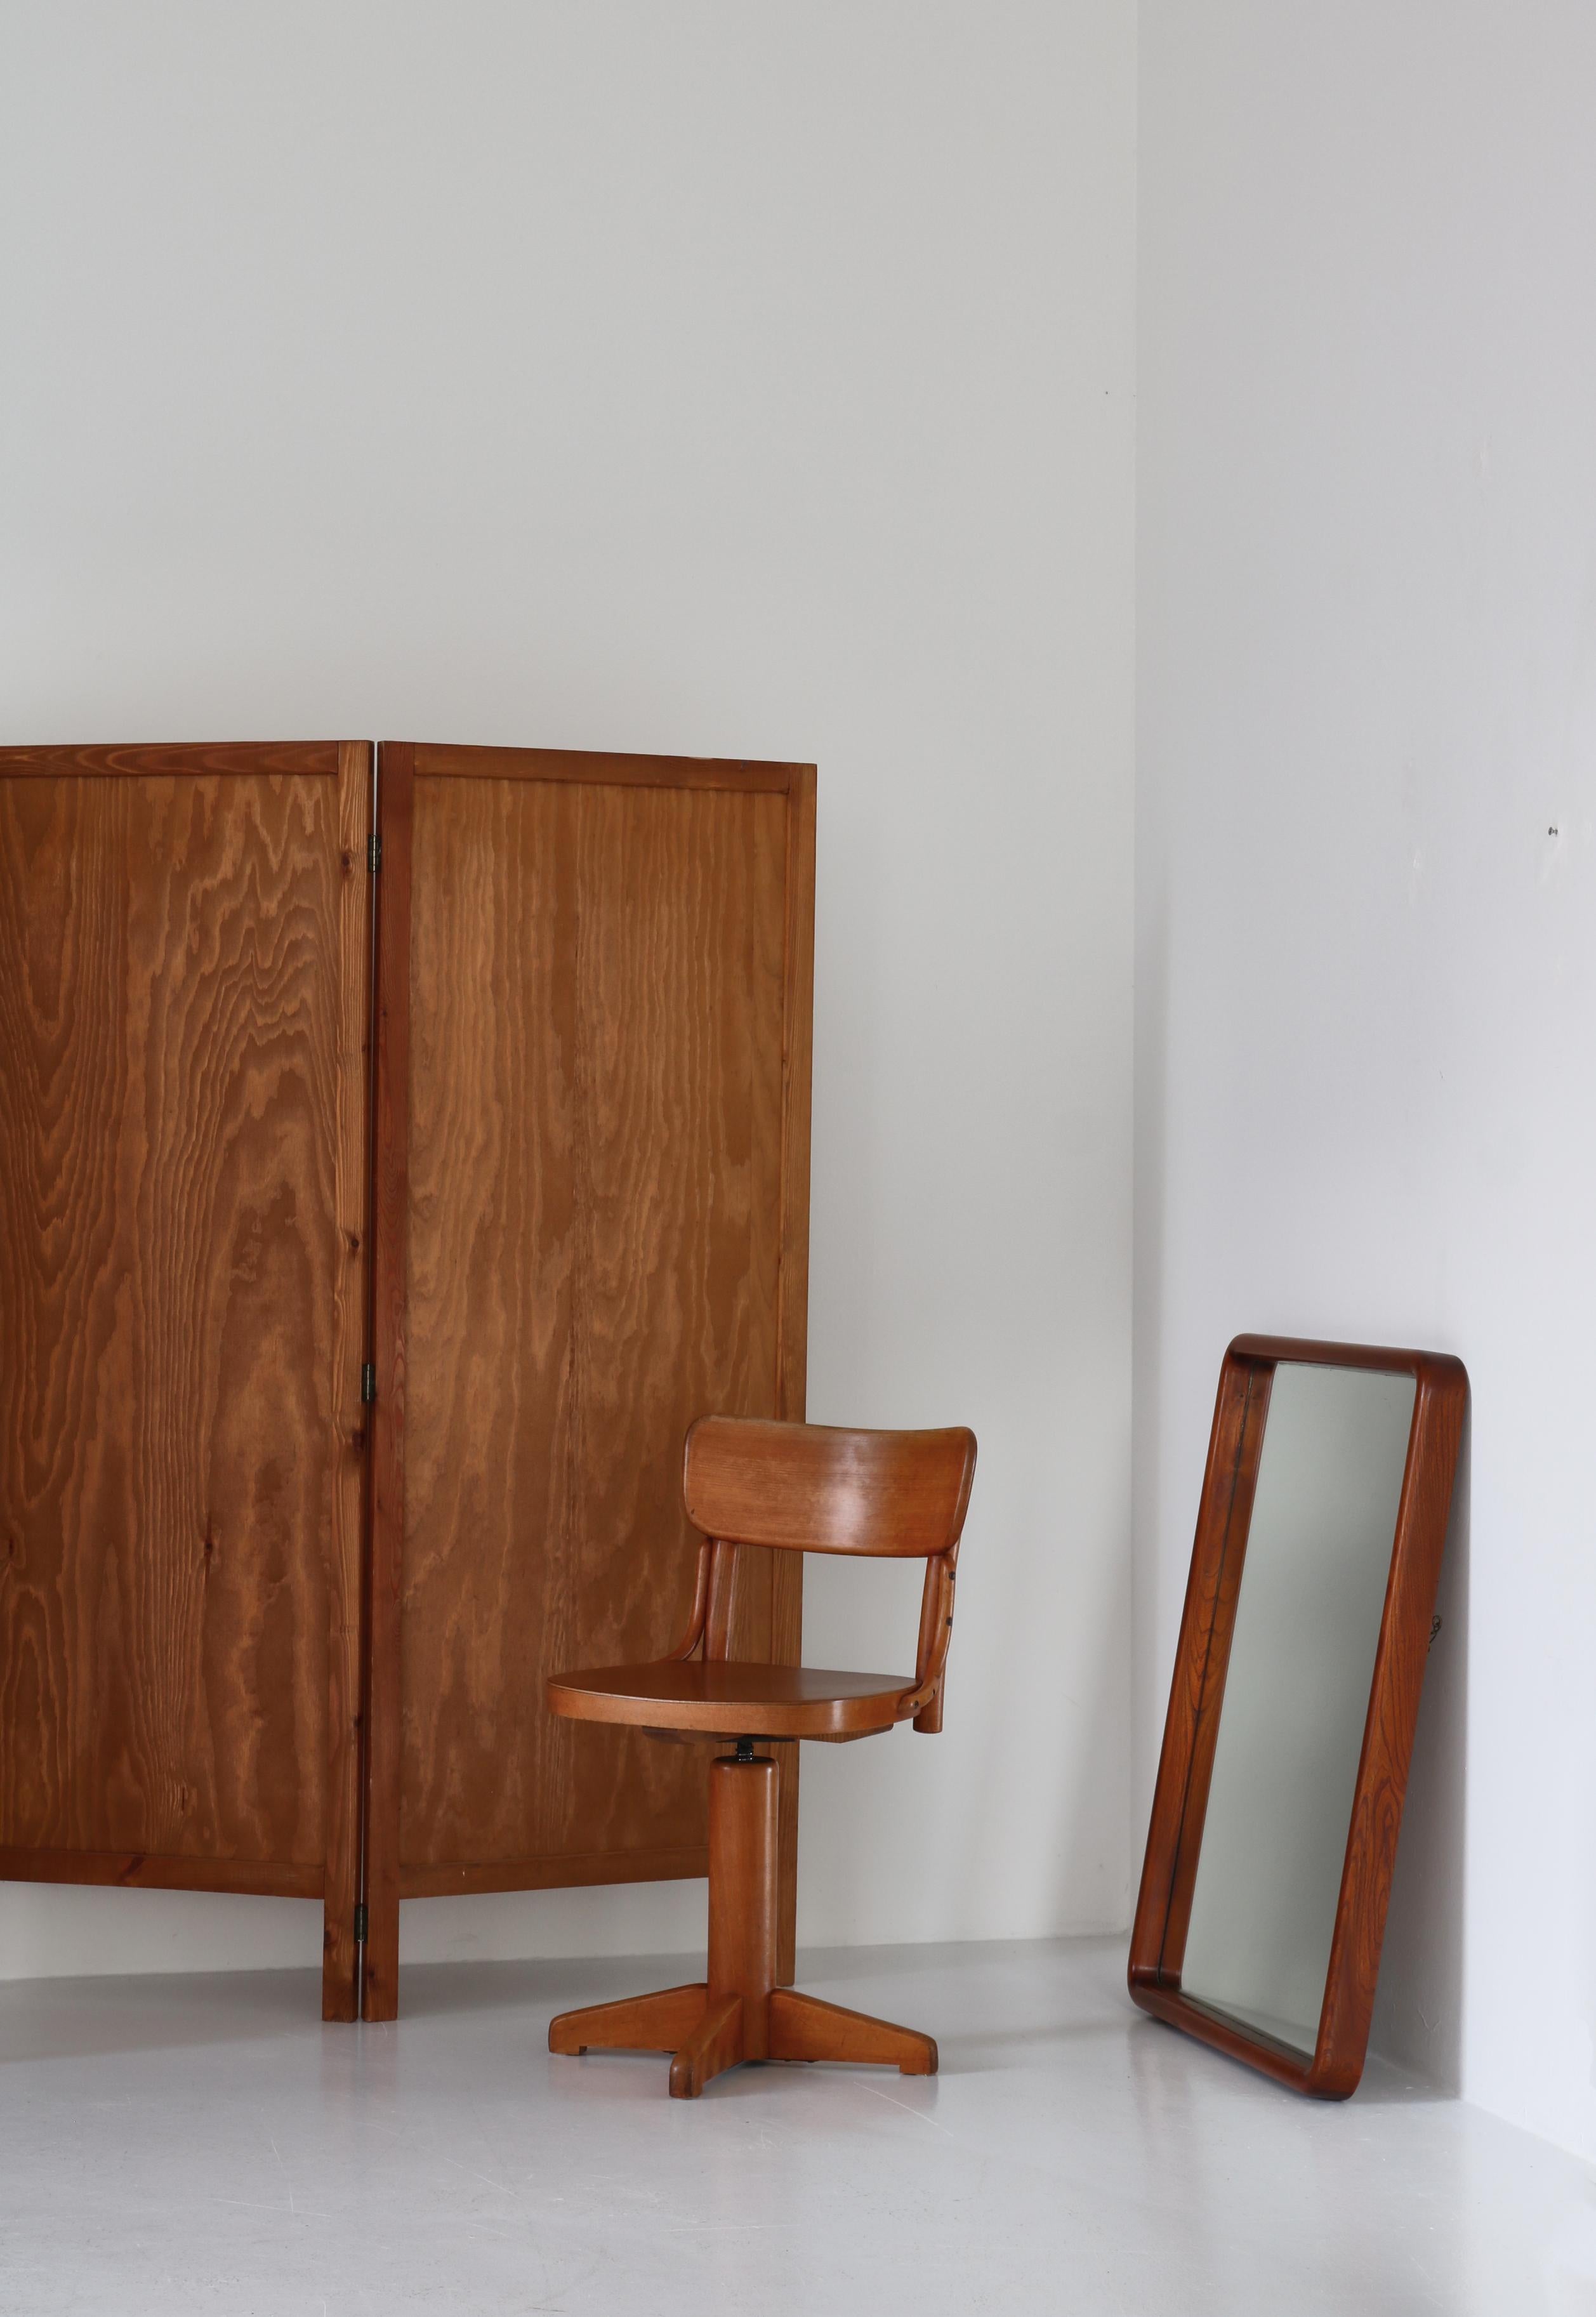 Large wall mirror attributed to Danish architect Vilhelm Lauritzen and executed in Scandinavian elm wood with a beautiful grain. Classic 1930 functionalism and superior craftsmanship makes this amazing piece a wonderful addition to any interior